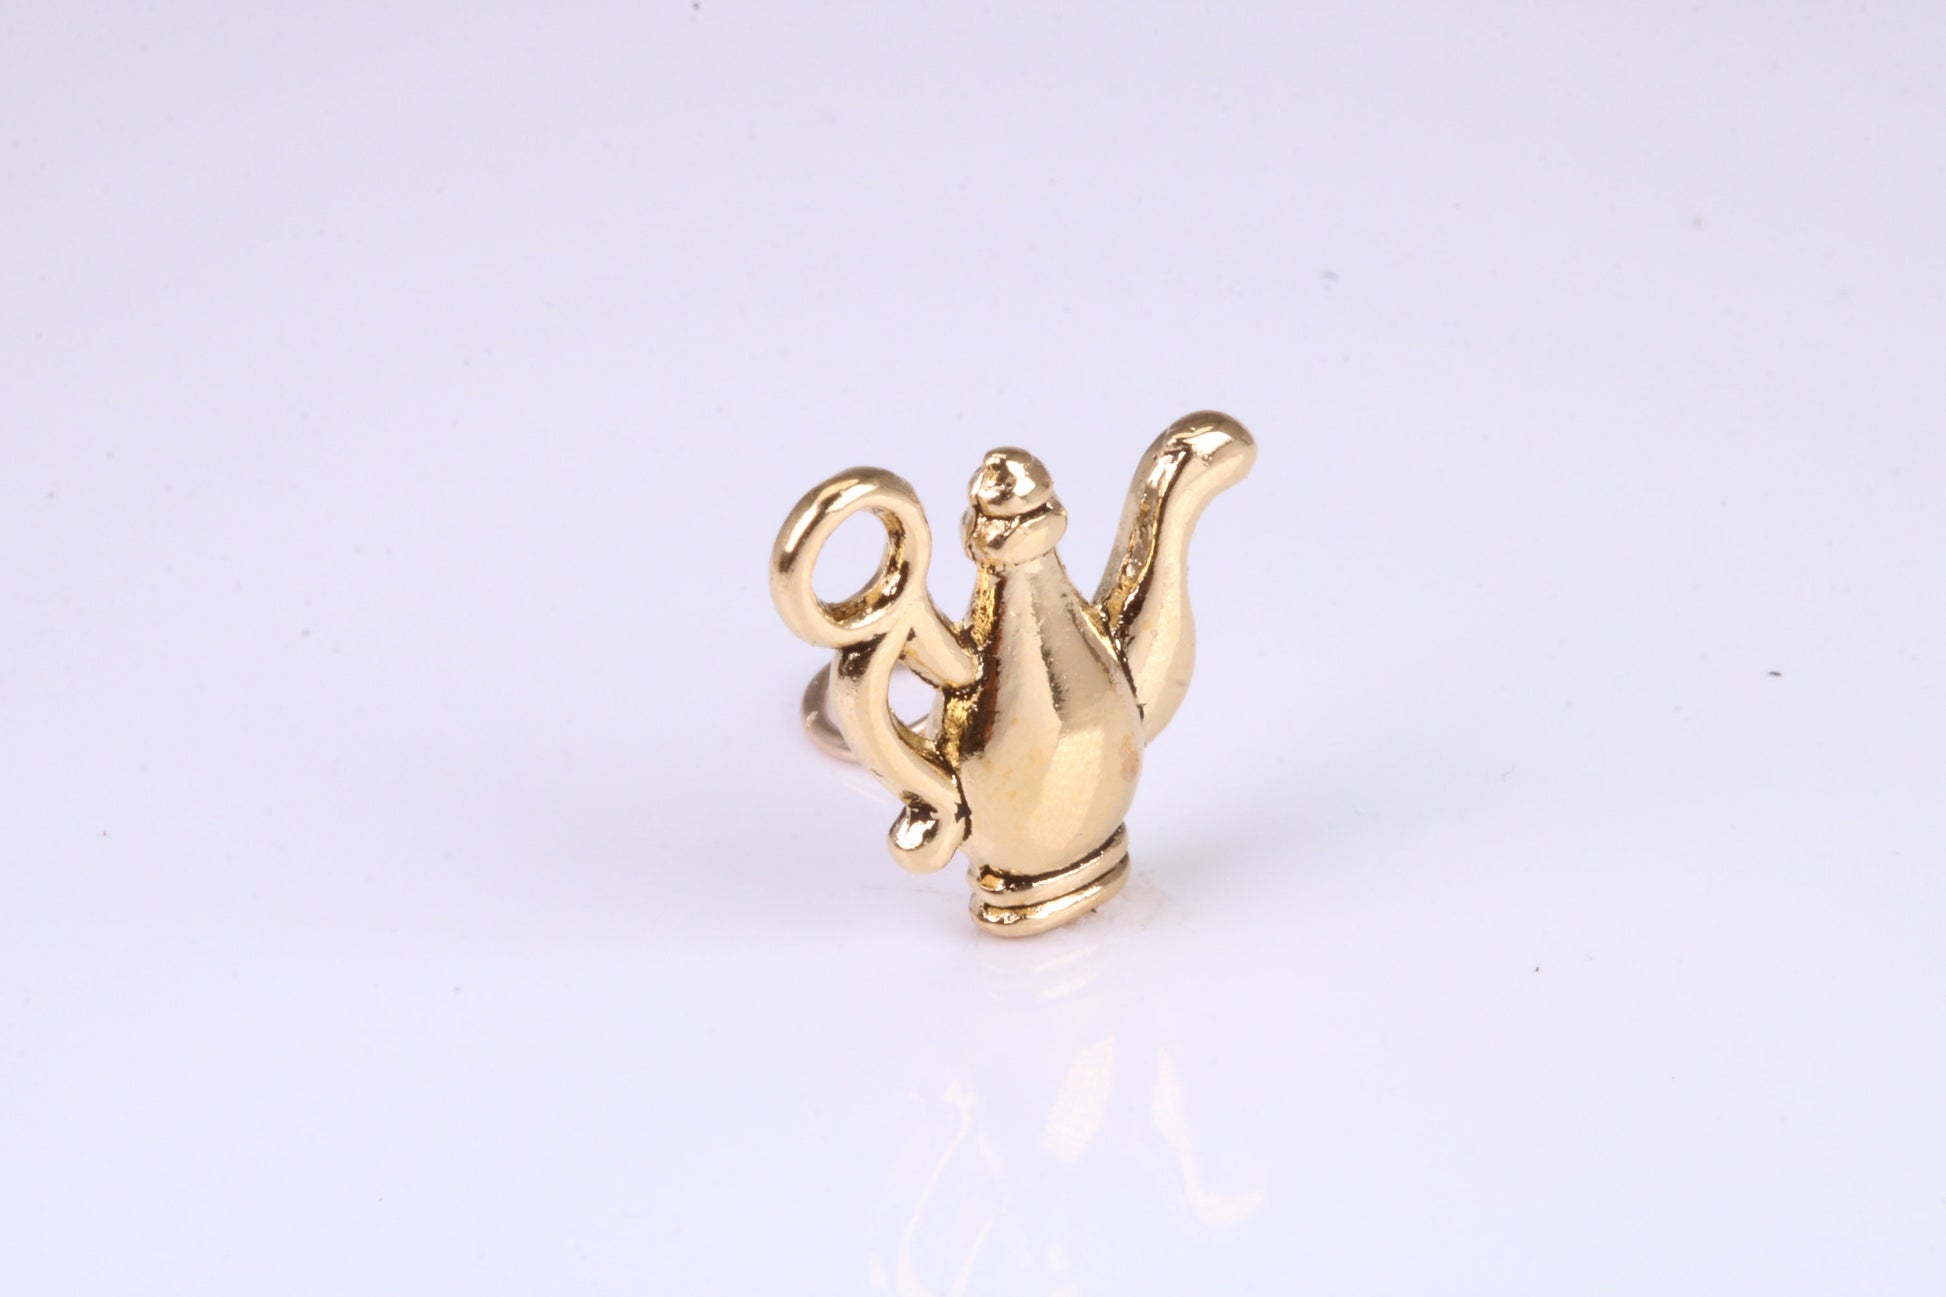 Teapot Charm, Traditional Charm, Made from Solid Yellow Gold, British Hallmarked, Complete with Attachment Link